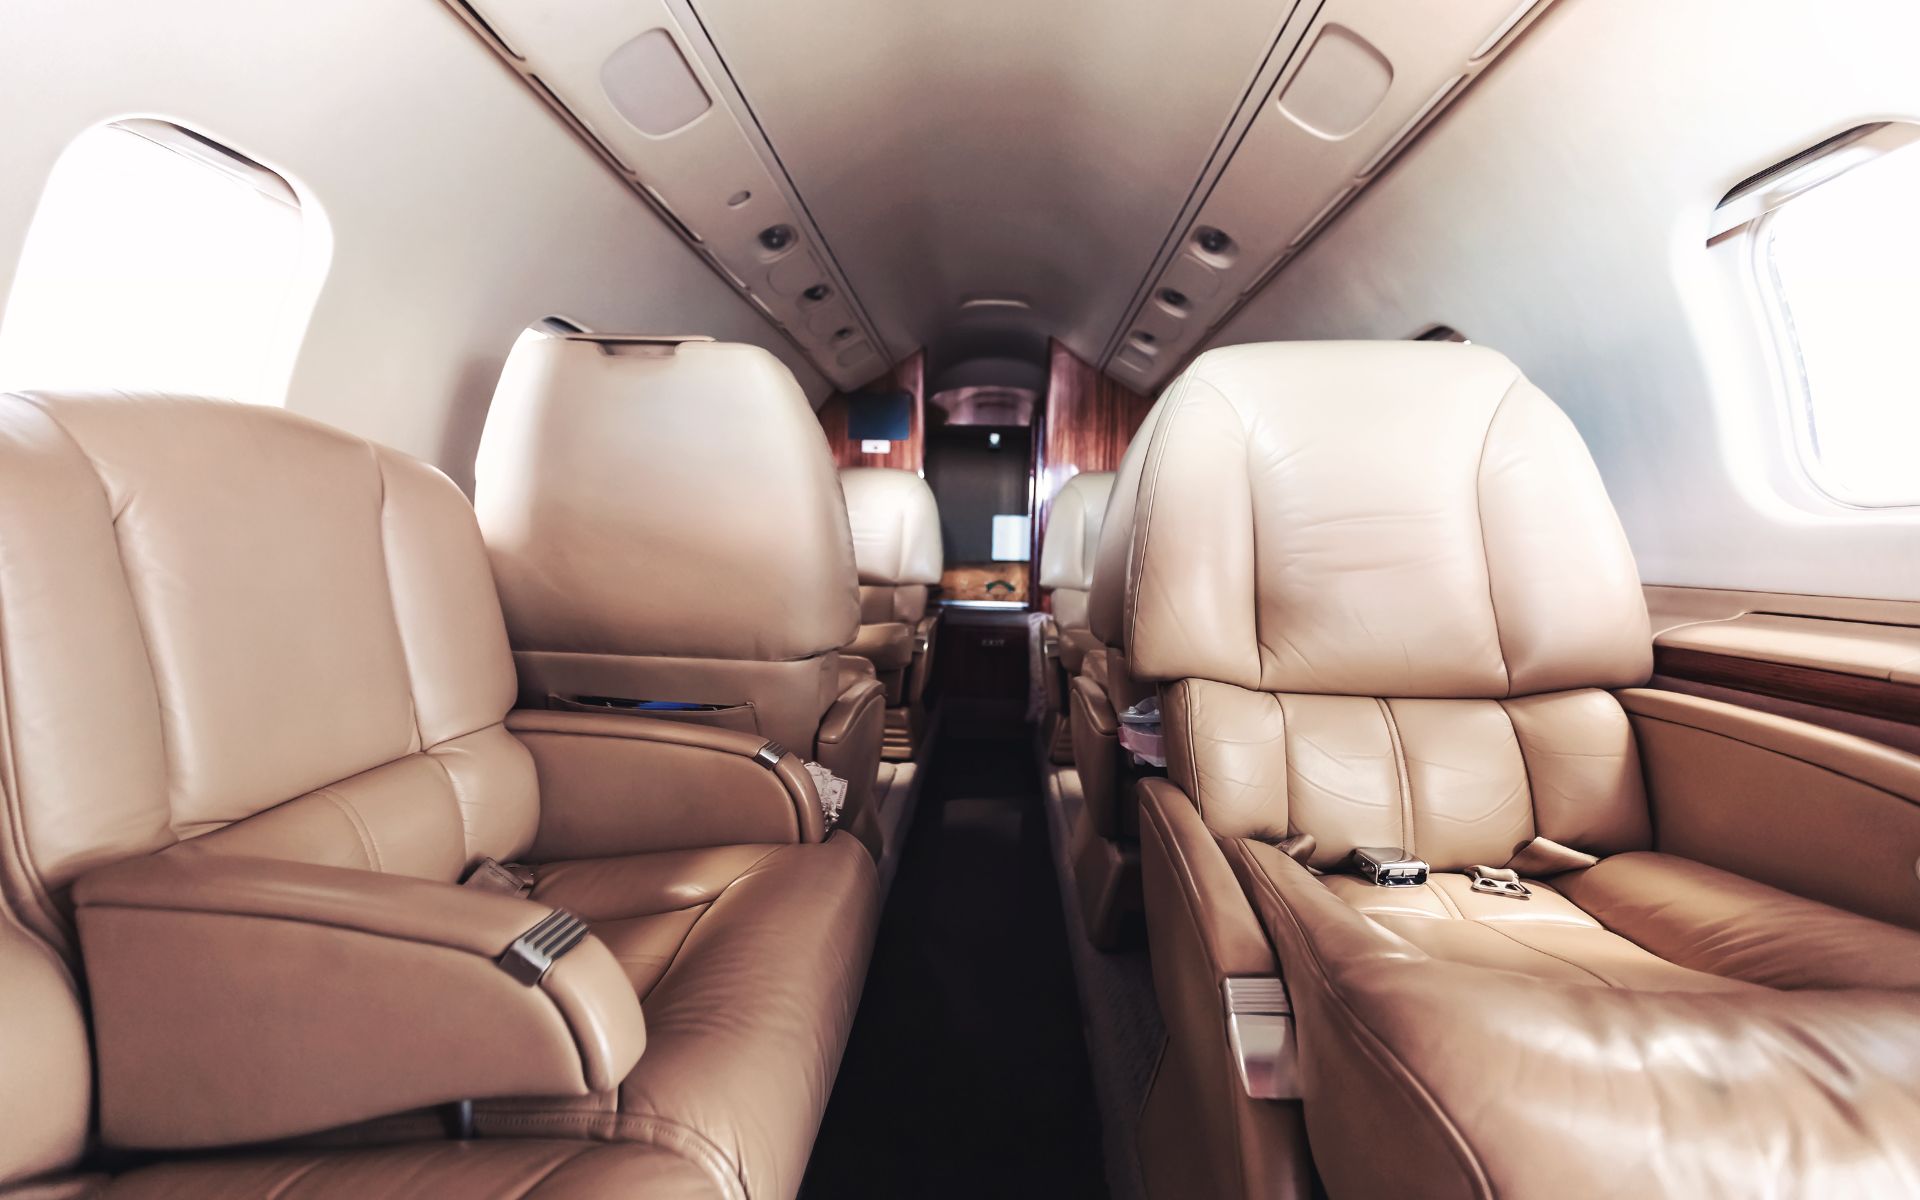 A Fresh Look at Luxury Private Jet Interiors